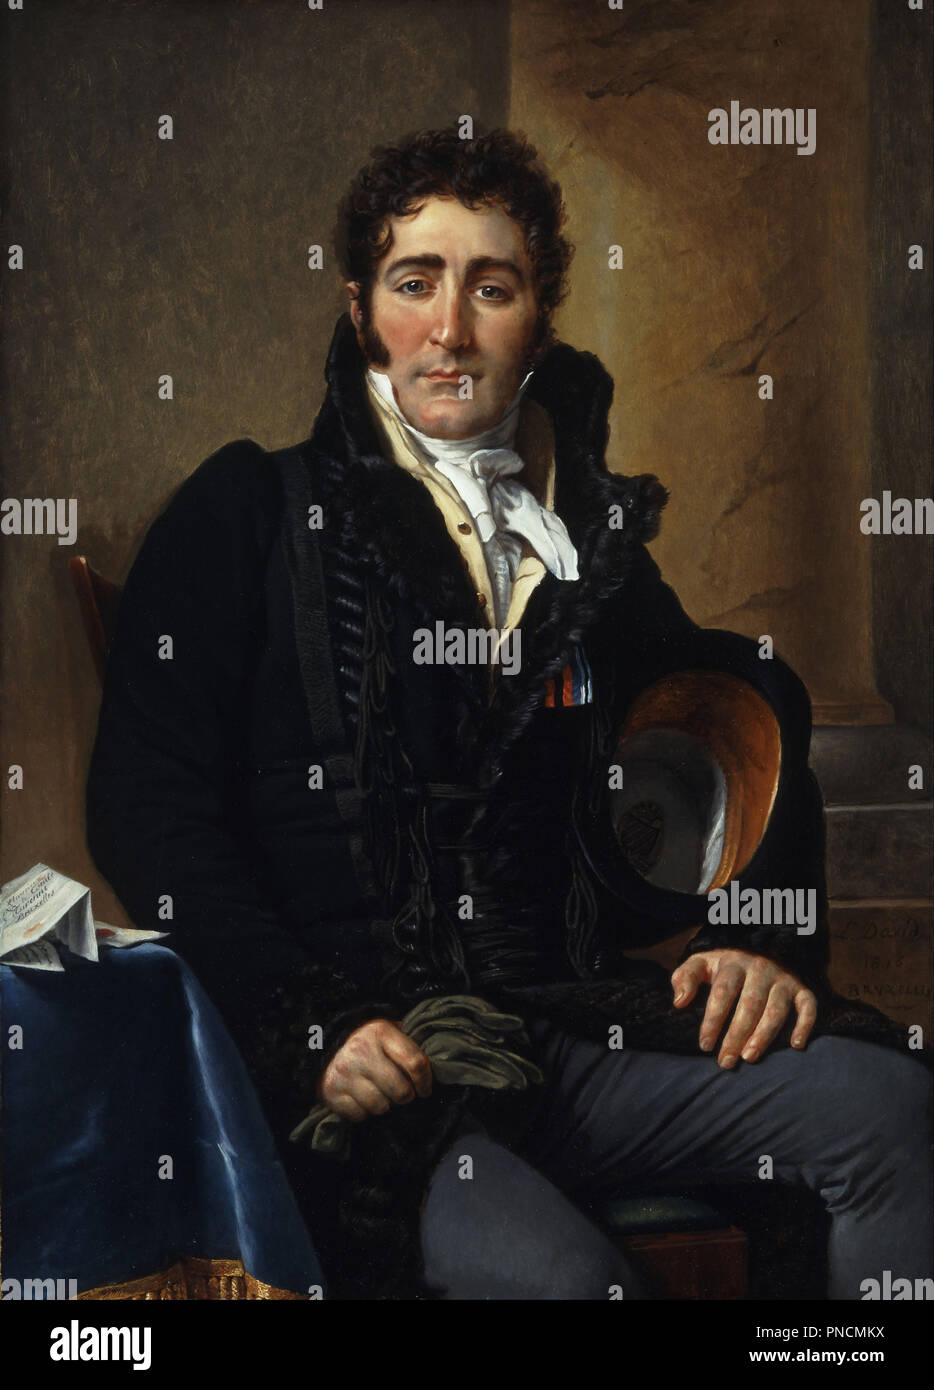 Portrait of the Comte de Turenne. Date/Period: 1816. Oil on wood. Height: 1,120 mm (44.09 in); Width: 810 mm (31.88 in). Author: DAVID, JACQUES LOUIS. Stock Photo